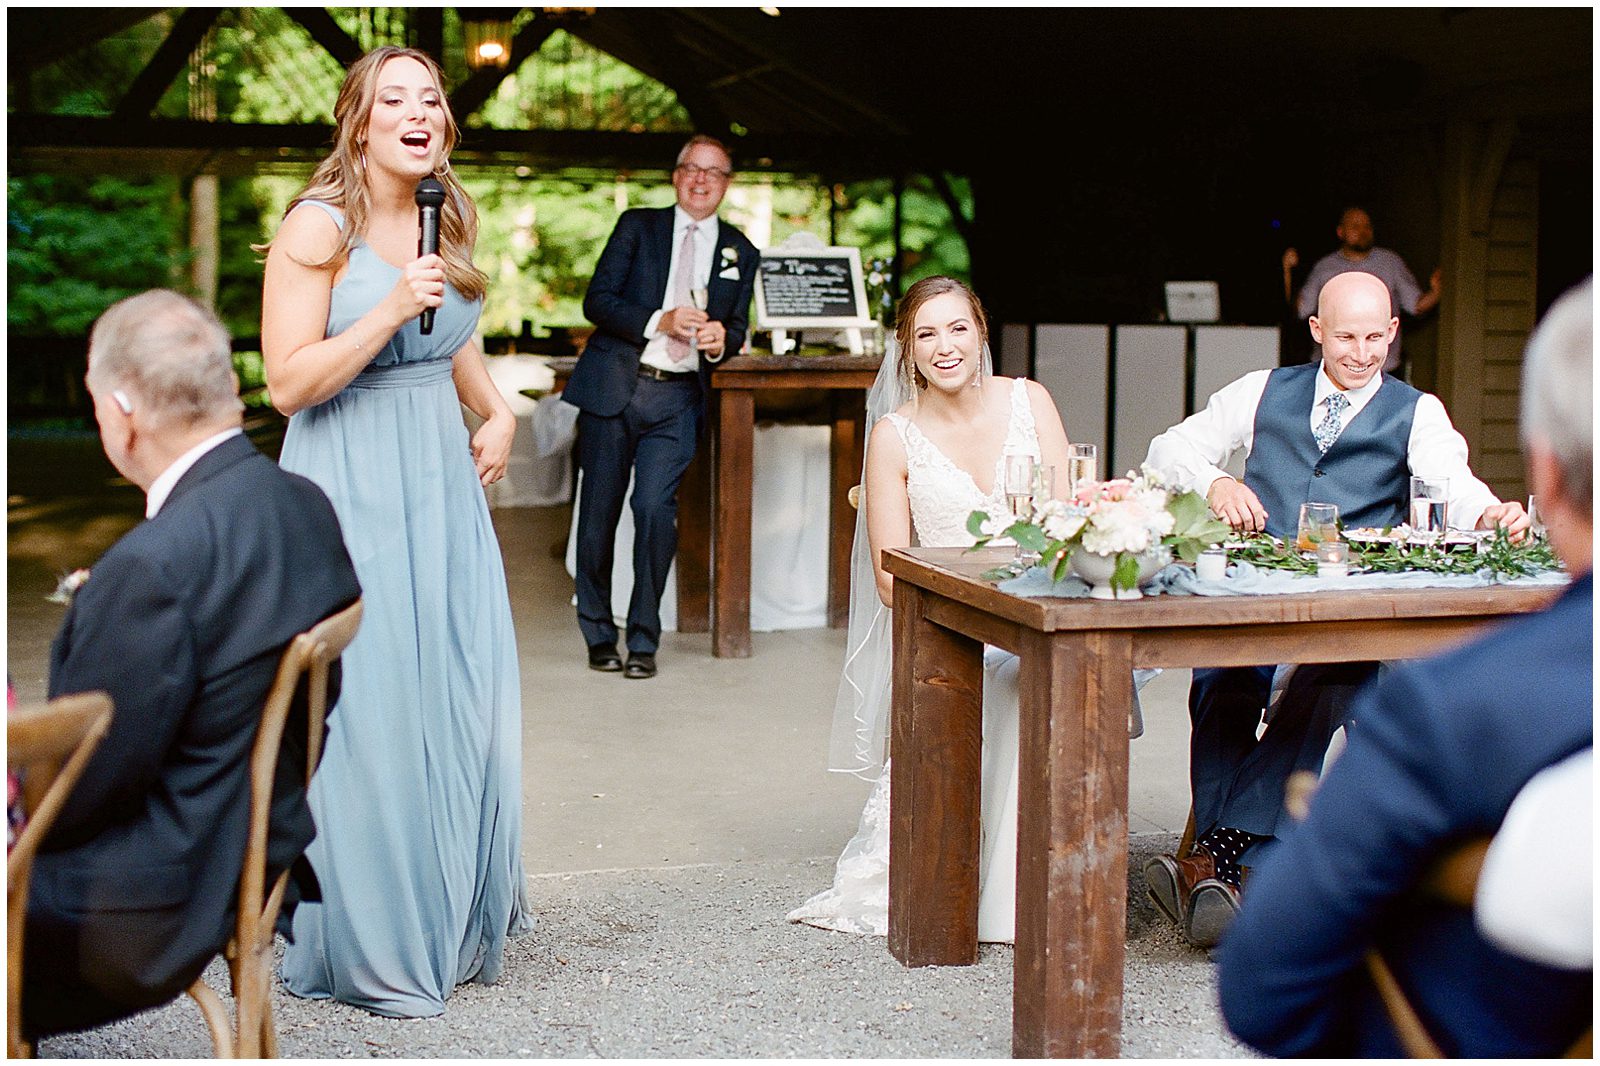 Maid of Honor Wedding Toast Bride and Groom Laughing Photo